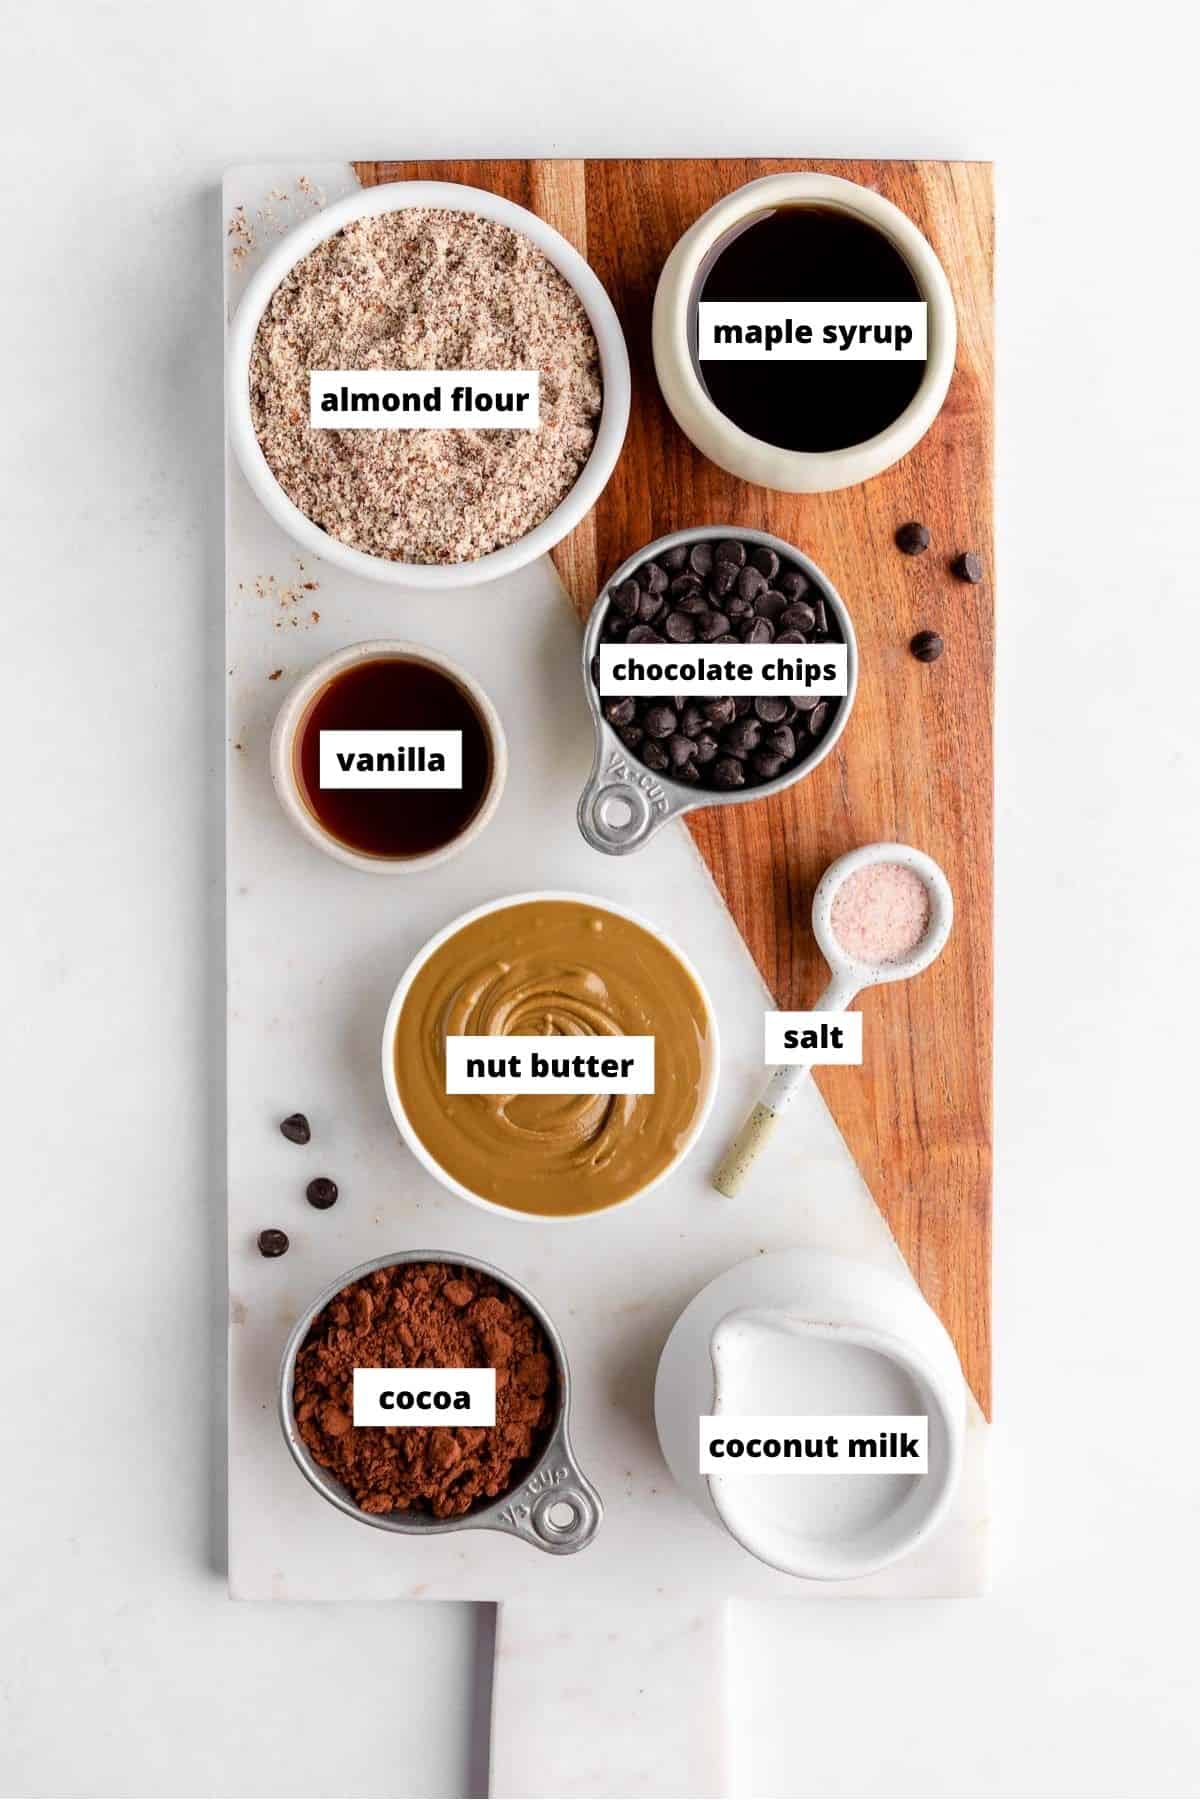 no-bake vegan chocolate tart ingredients on a marble board, including almond flour, nut butter, coconut milk, cocoa, and chocolate chips